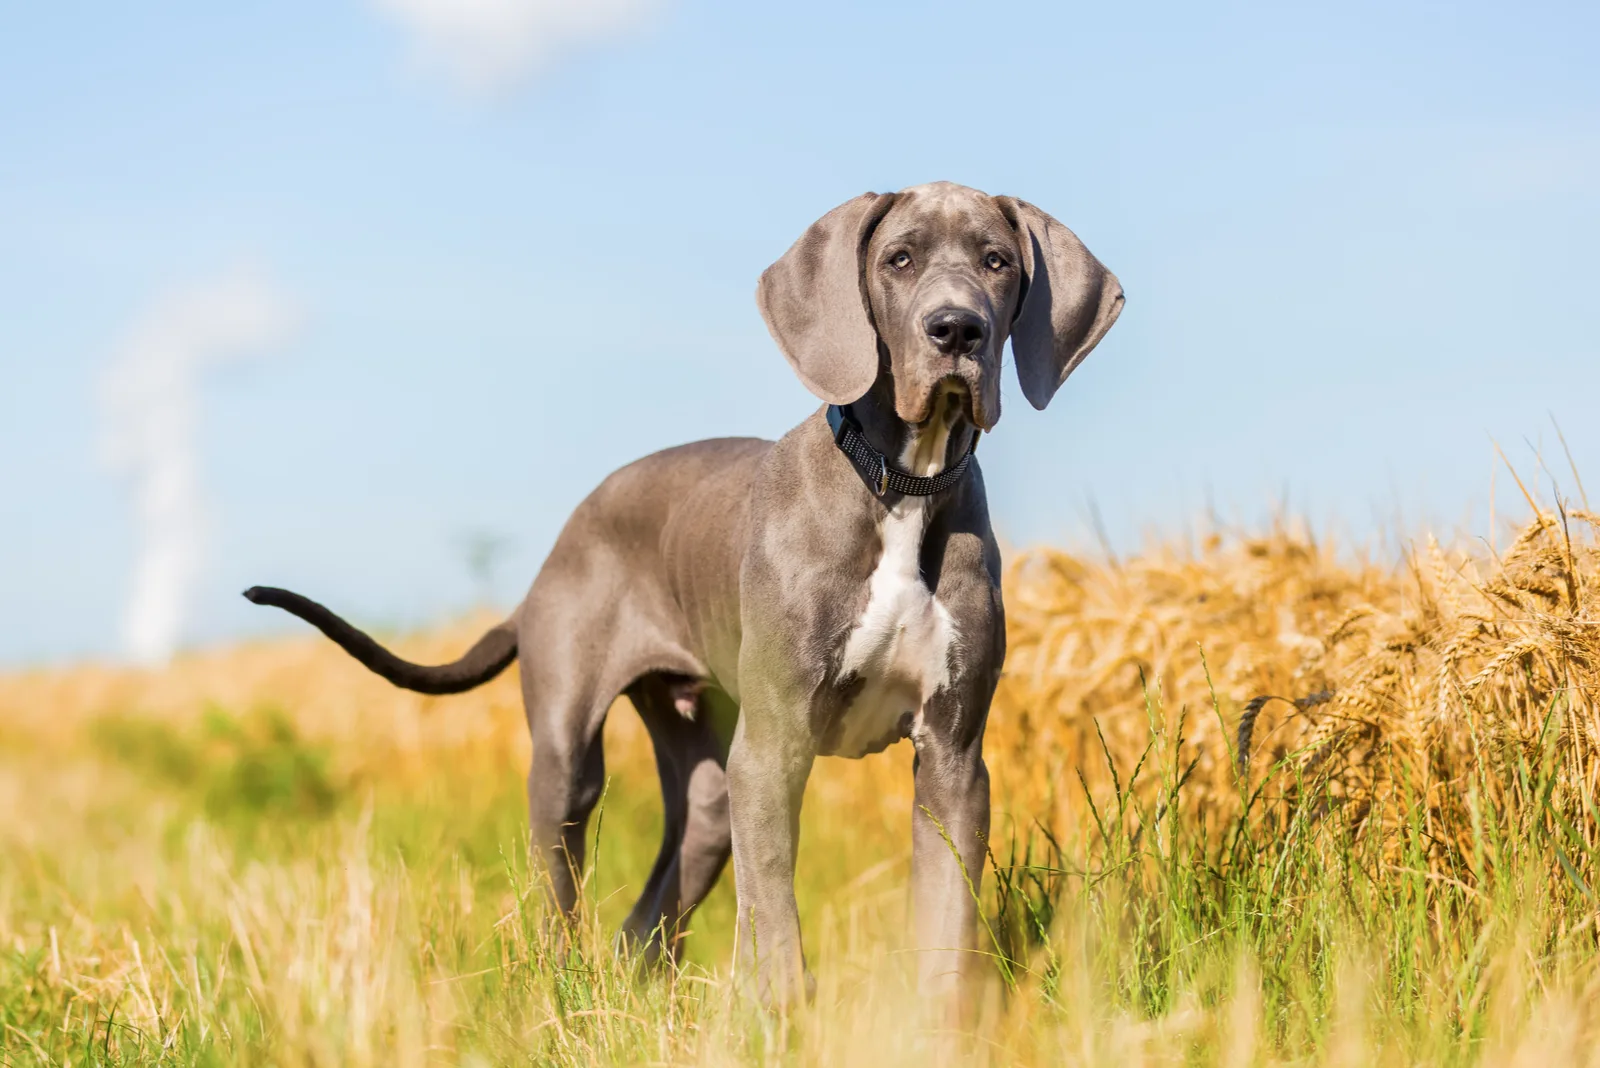 Great Dane puppy who stands on a country path